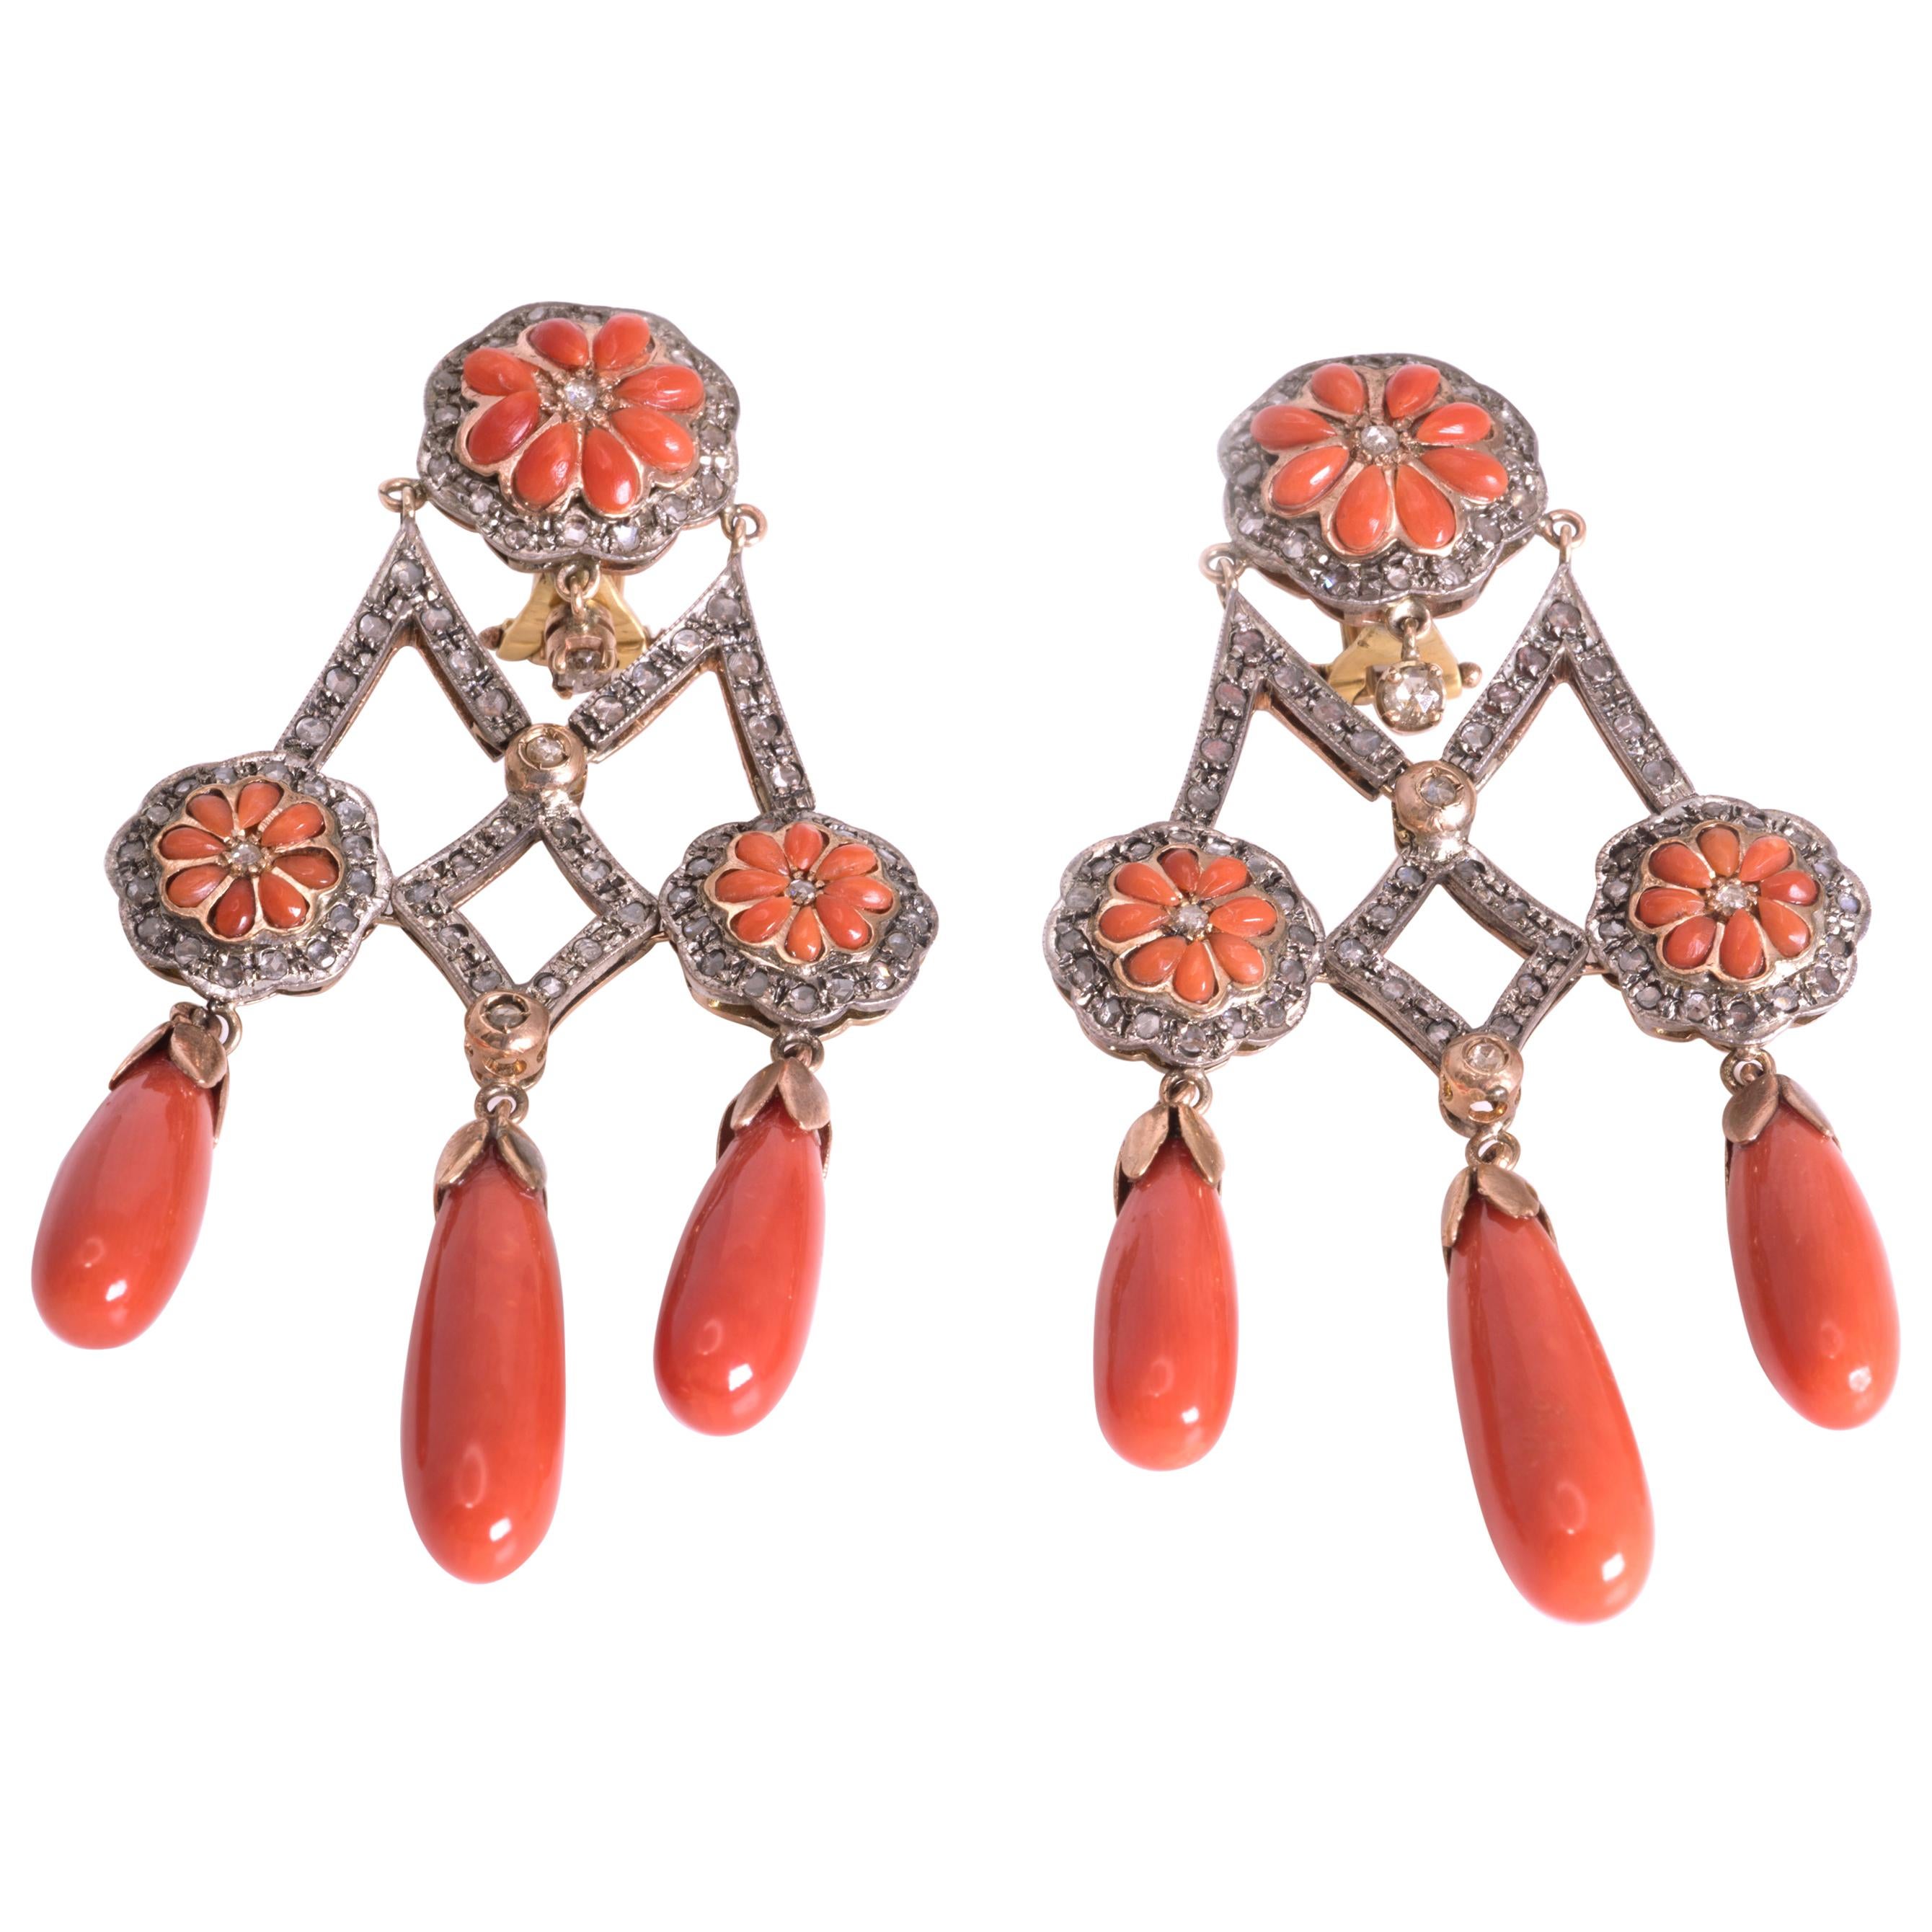 These Exquisite Antique Earrings From the Art Deco Era Are Made of 9ct  Yellow Gold and Feature Beautiful Coral Stones - Etsy